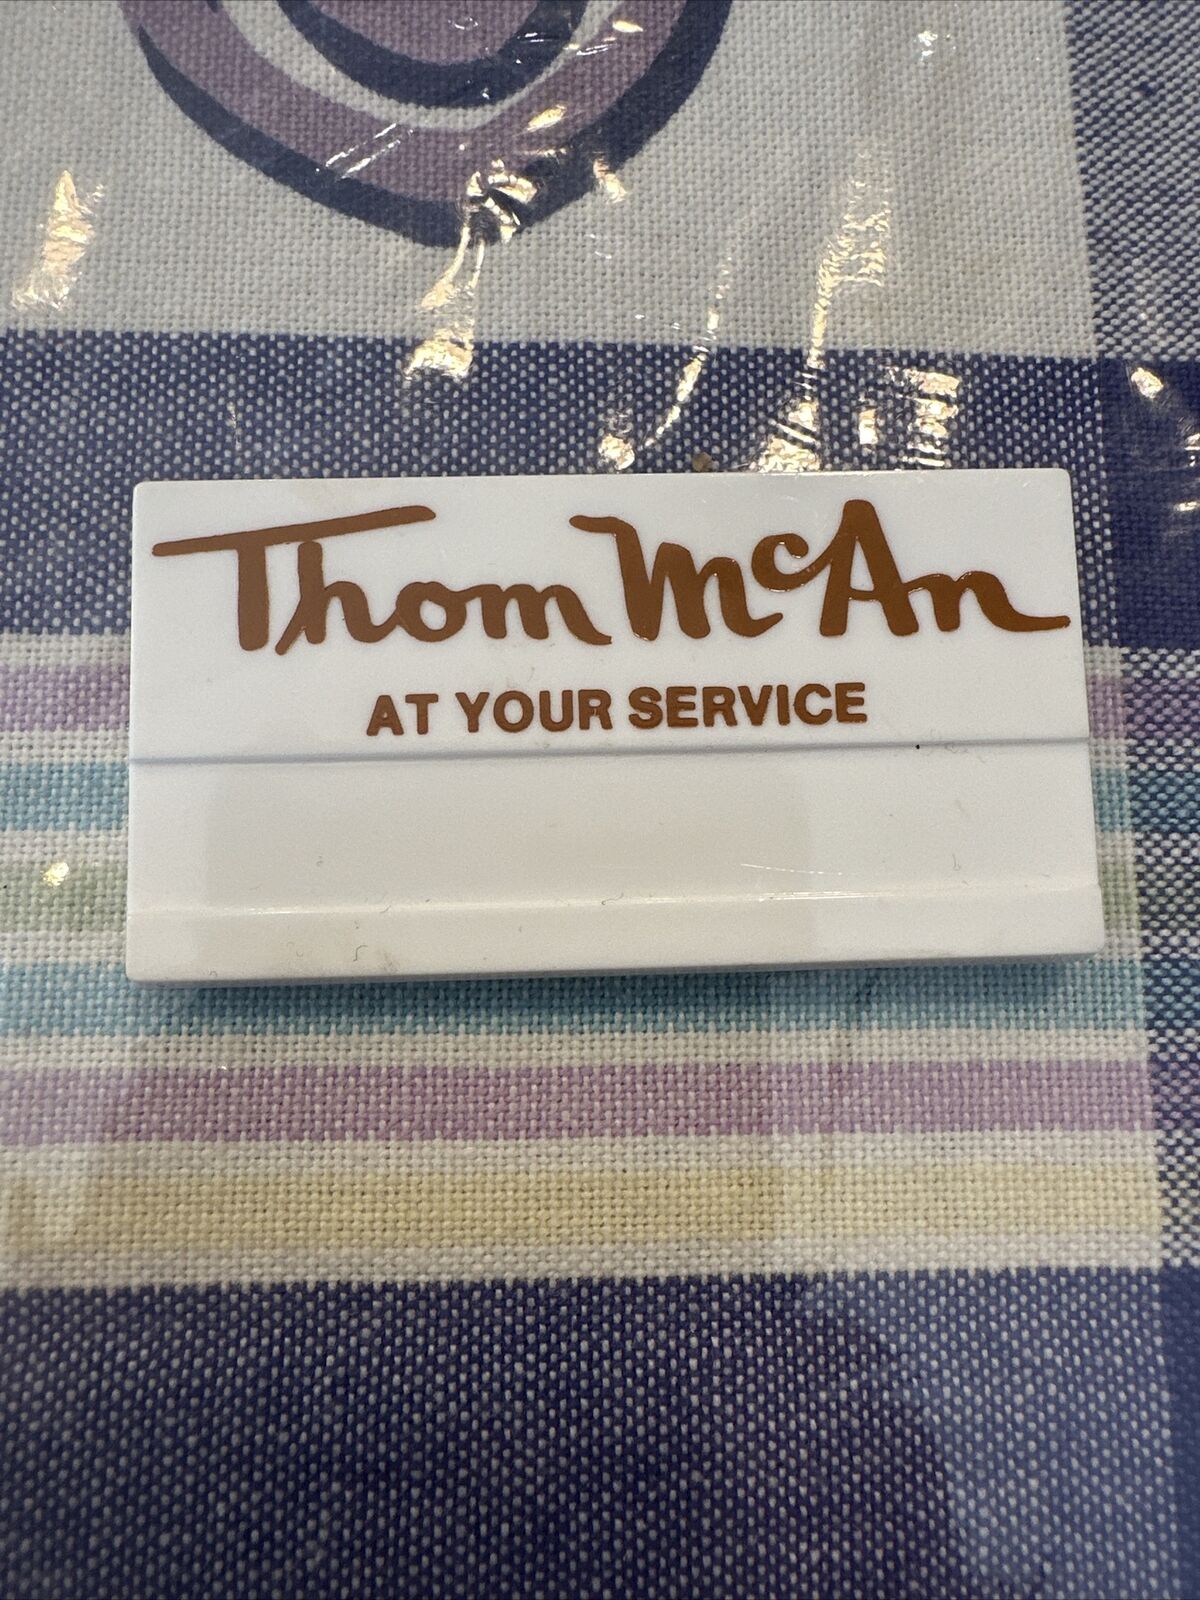 THOM MCAN - Vintage Defunct Retail Mall Shoe Store Employee Name Tag